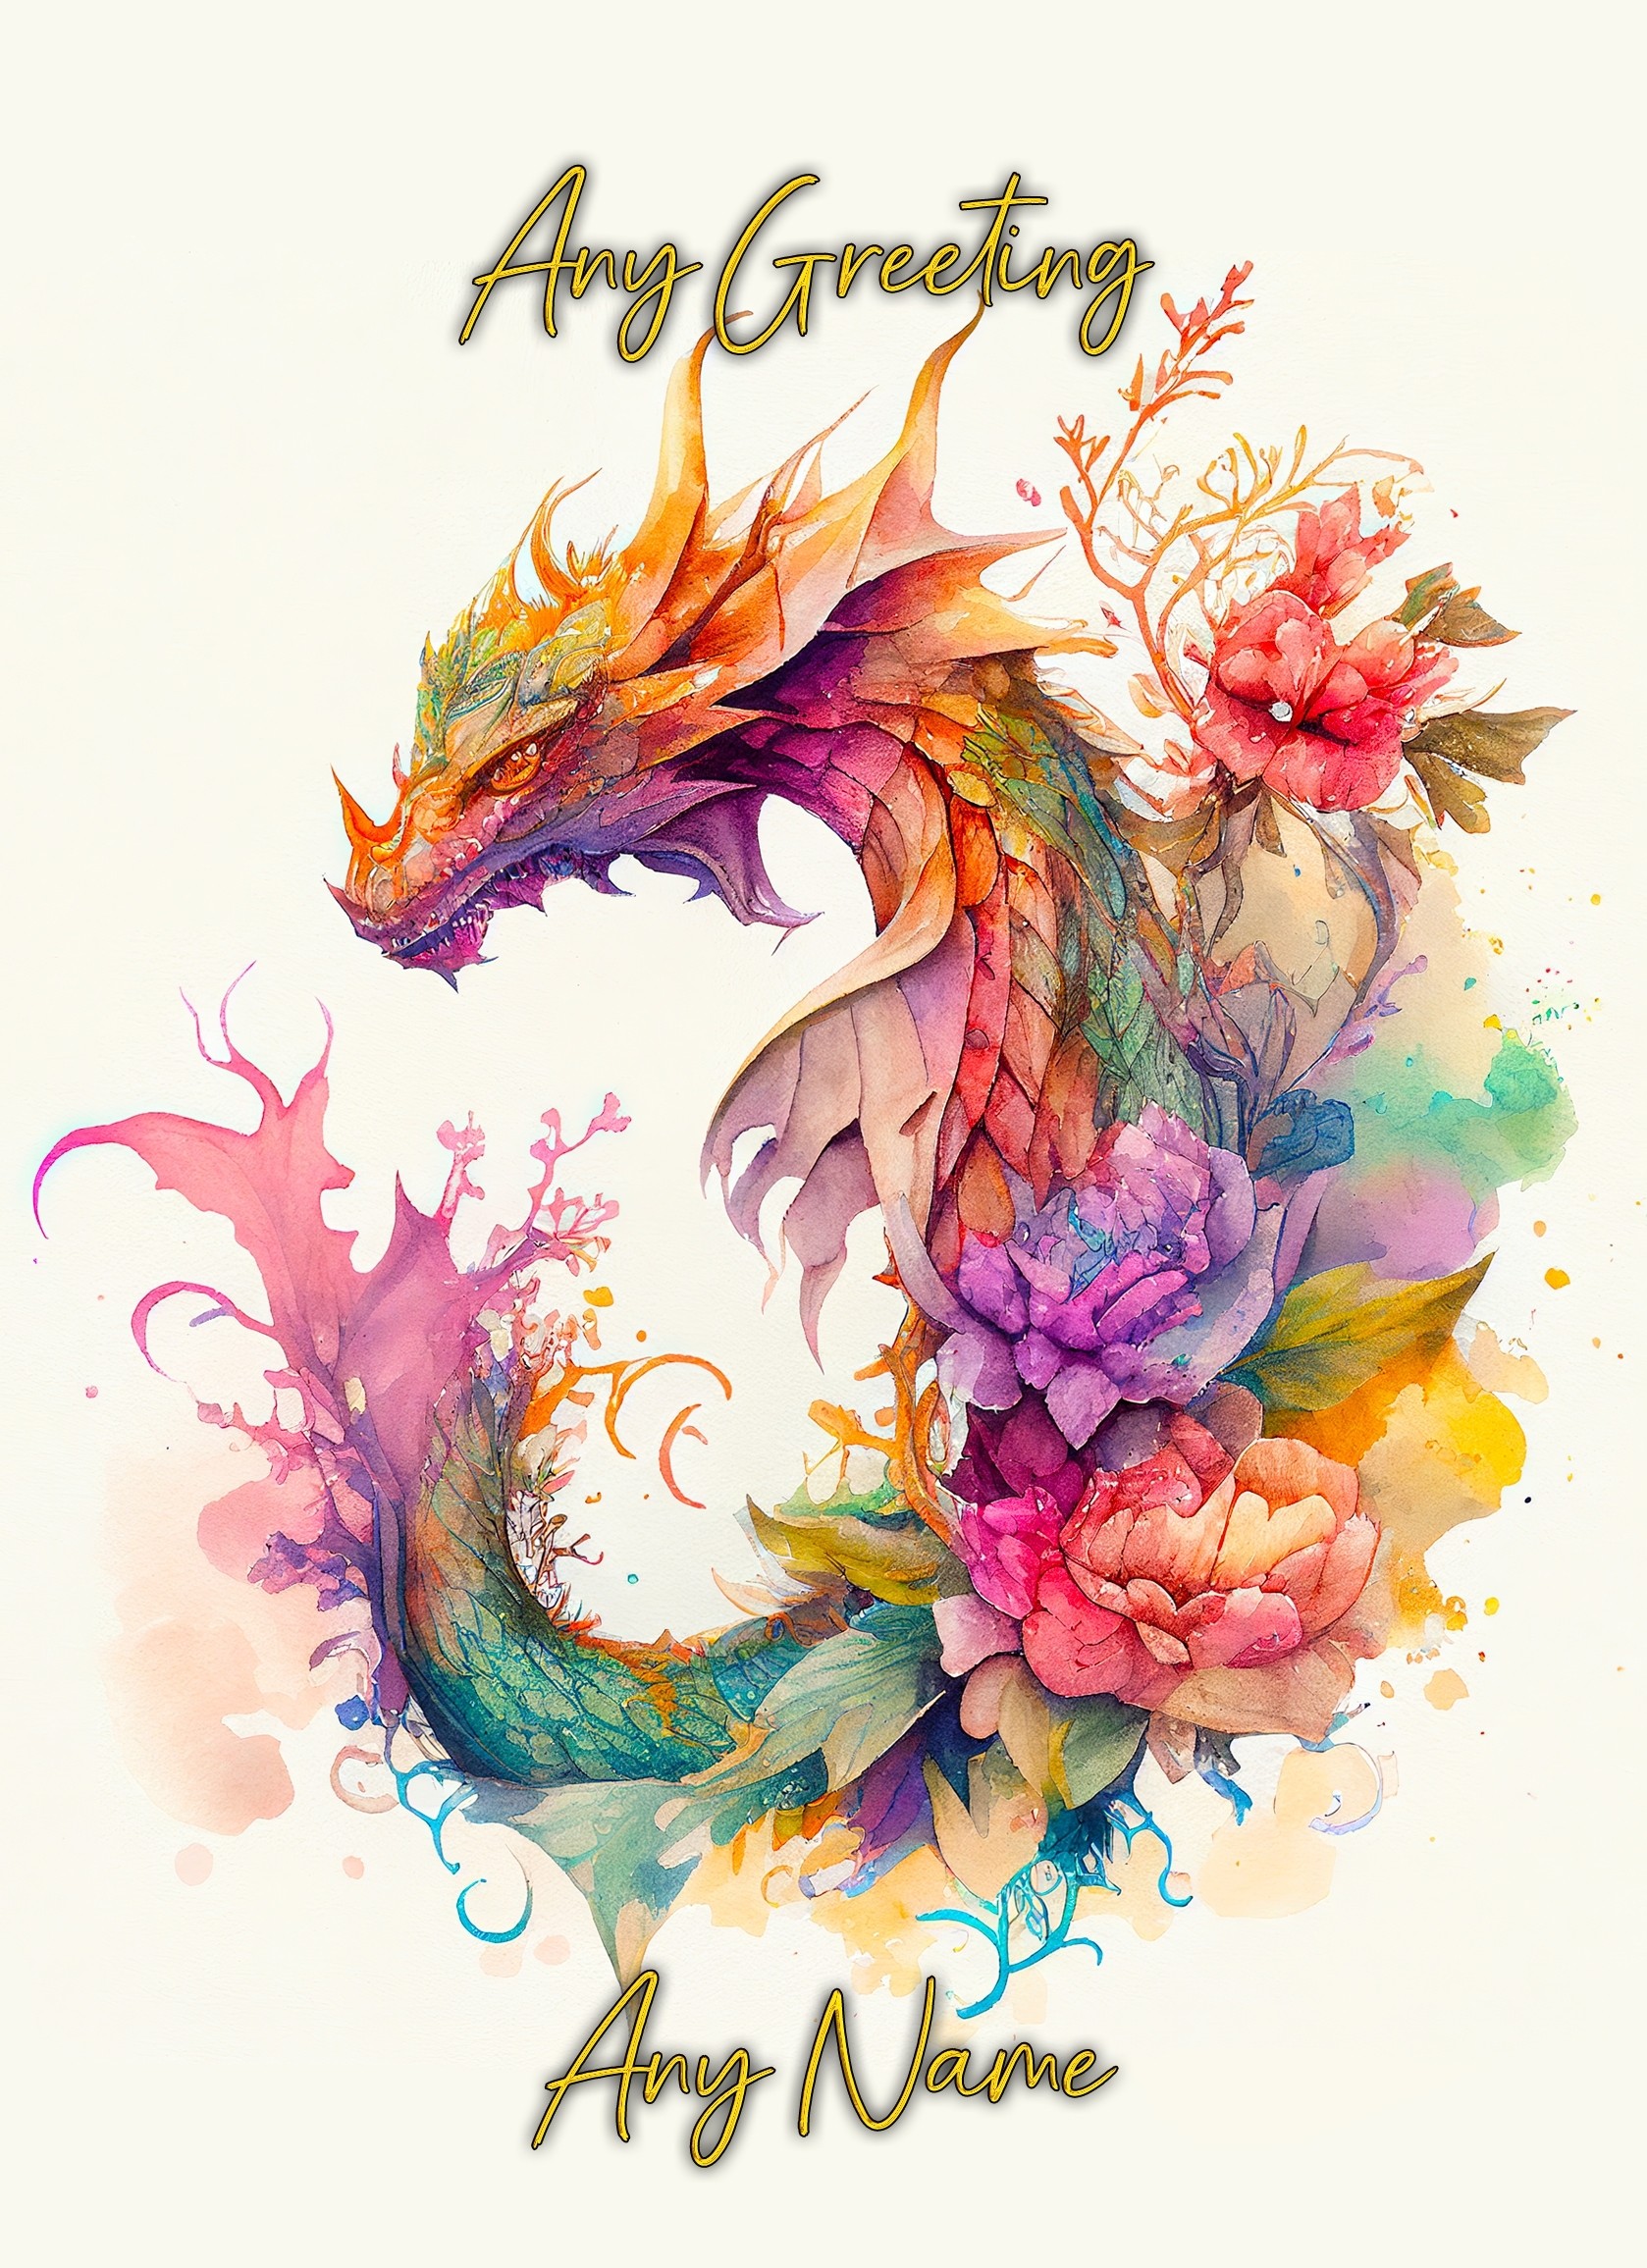 Personalised Dragon Watercolour Art Fantasy Greeting Card (Birthday, Fathers Day, Any Occasion)